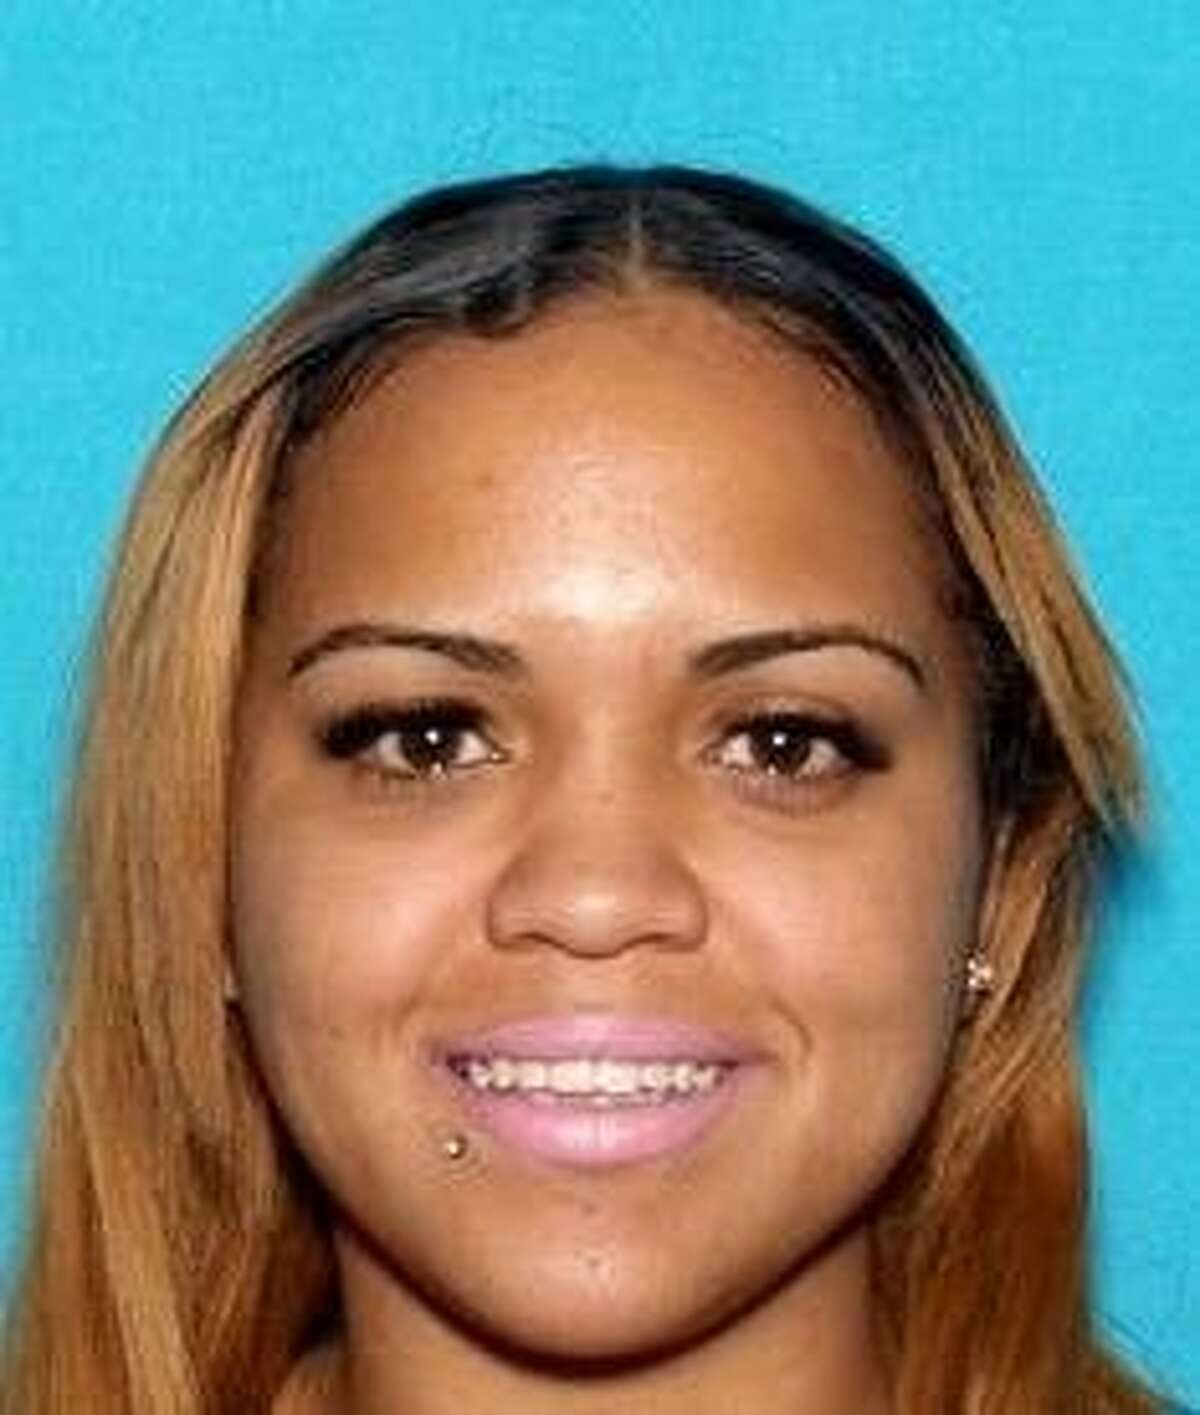 Alameda County prosecutors have charged Erlynne Kay Sanchez-Edwards, 25, with hit-and-run, resisting arrest and driving on a suspended license. Sanchez-Edwards allegedly crashed a stolen car on the Bay Bridge and struggled with a California Highway Patrol officer before falling into the water 70 feet below on the morning of Wednesday, Aug. 12, 2015.